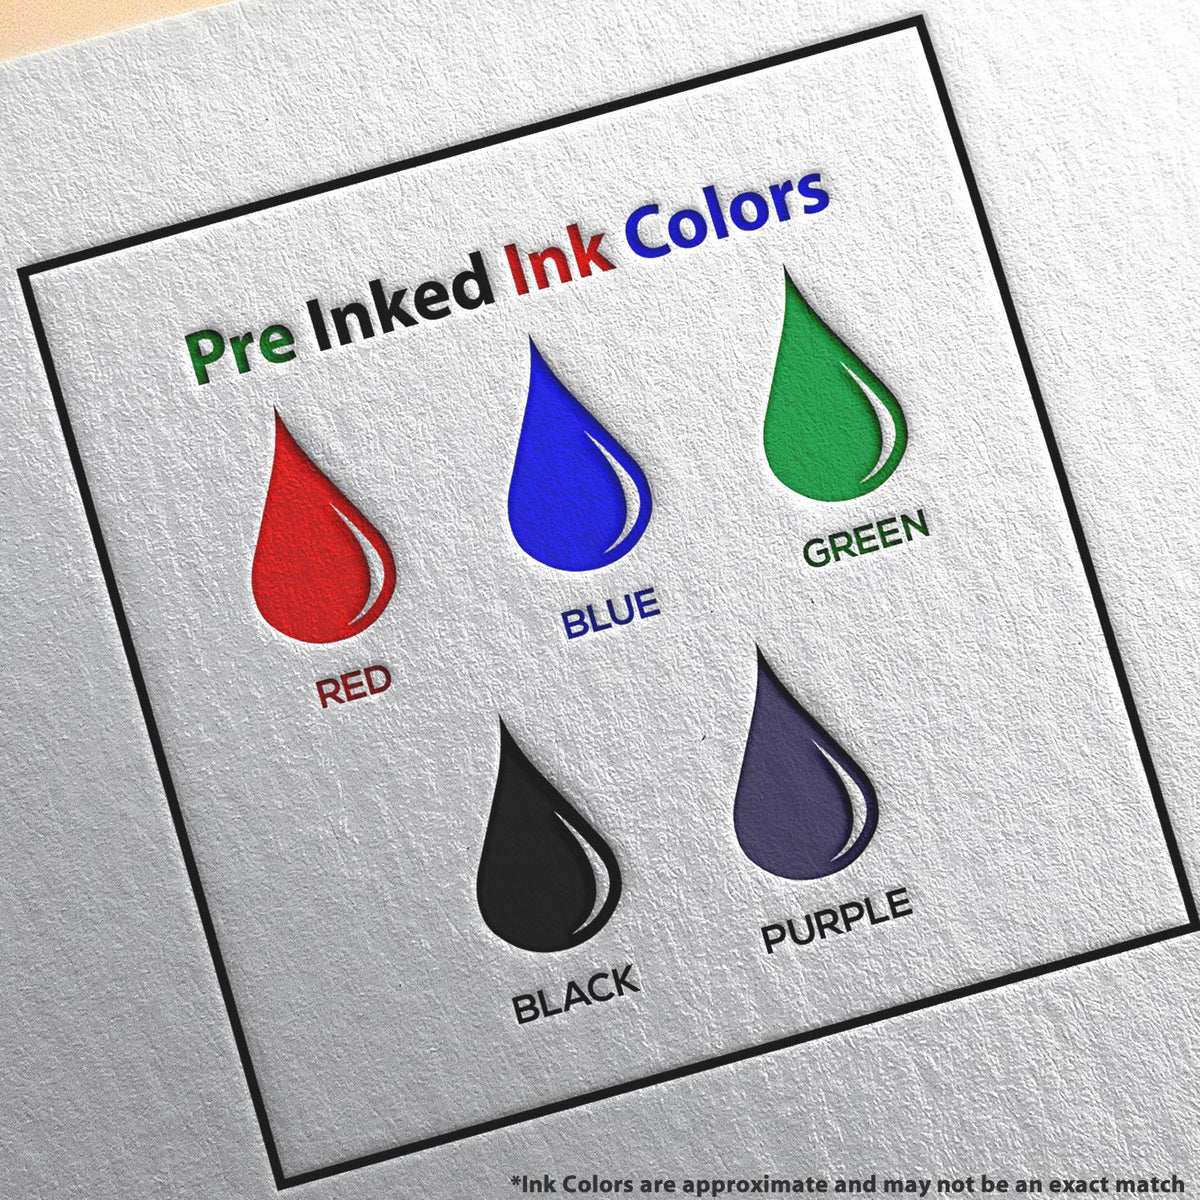 A picture showing the different ink colors or hues available for the Slim Pre-Inked Georgia Landscape Architect Seal Stamp product.